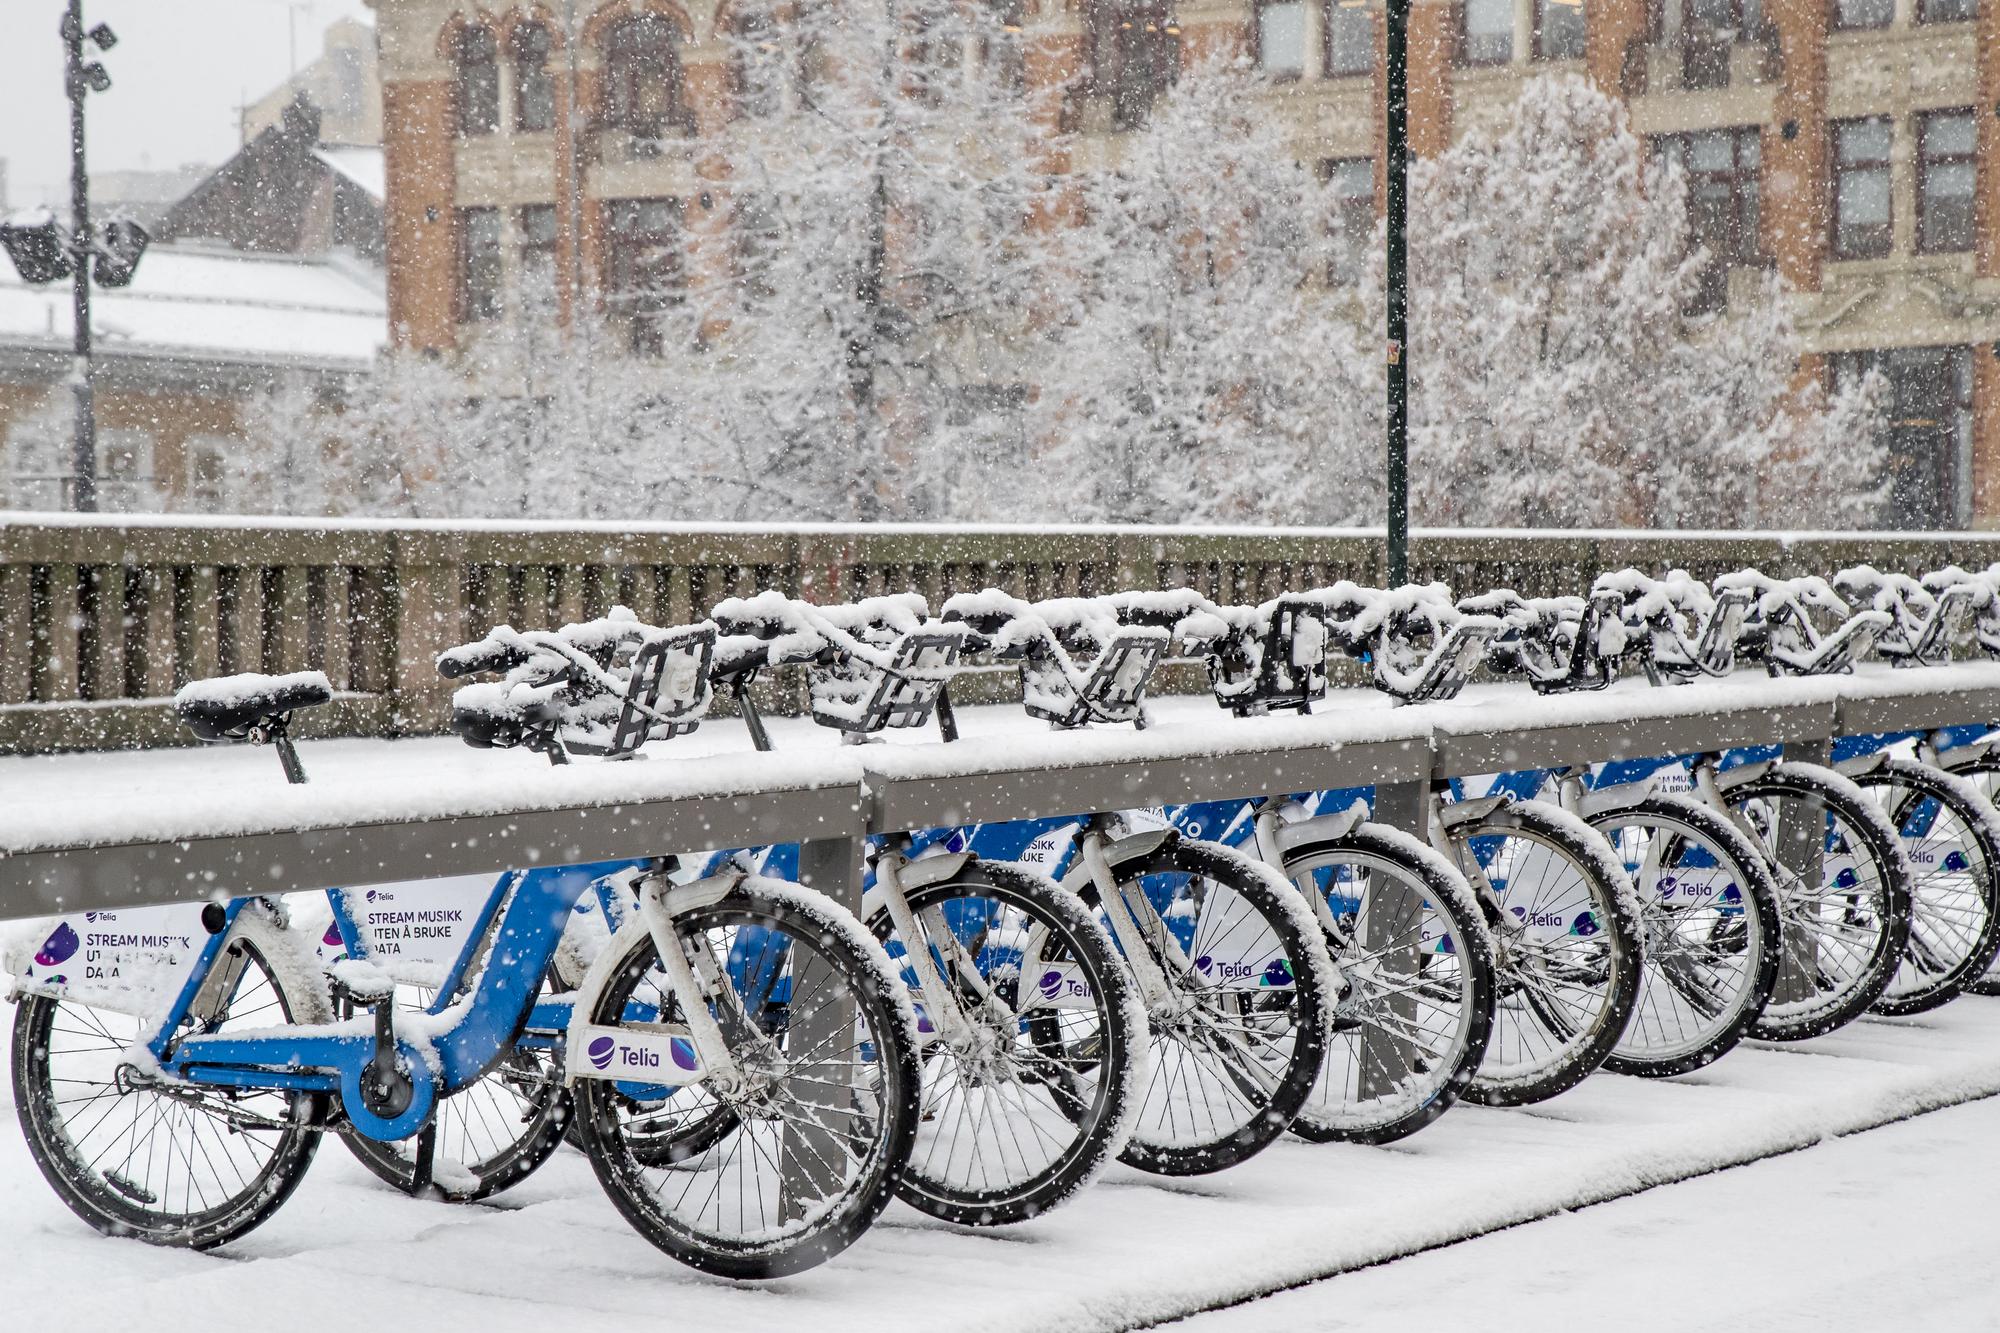 City bikes are covered in snow in central Oslo, after this winter's first snowfall, on November 14, 2017. Heiko JUNGE / NTB Scanpix / AFP [AFP/NTB Scanpix - Heiko Junge]